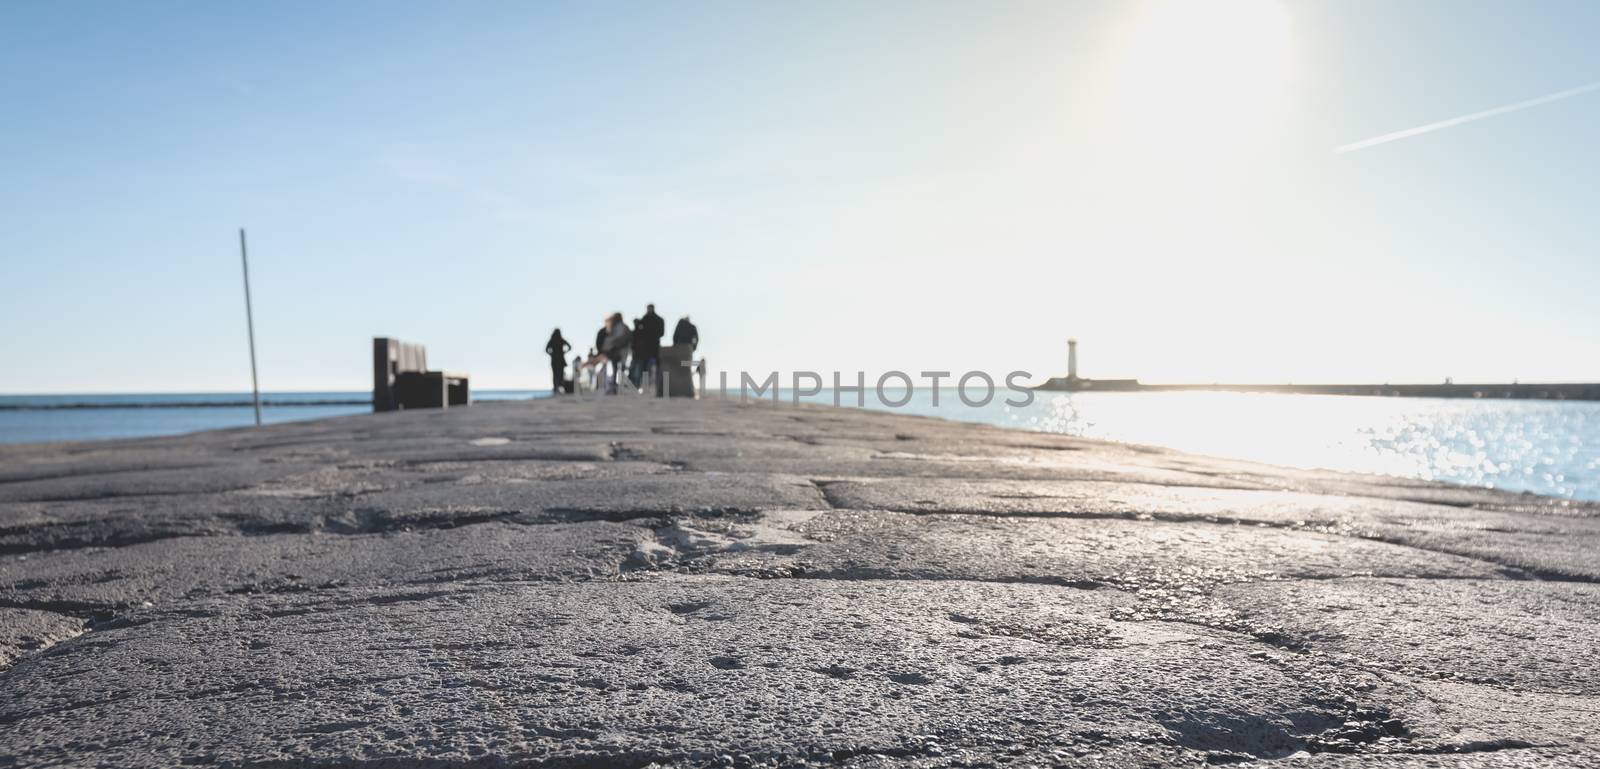 Agde, France - January 01, 2019: street atmosphere of the quays of the port of Agde where people are walking on a winter day